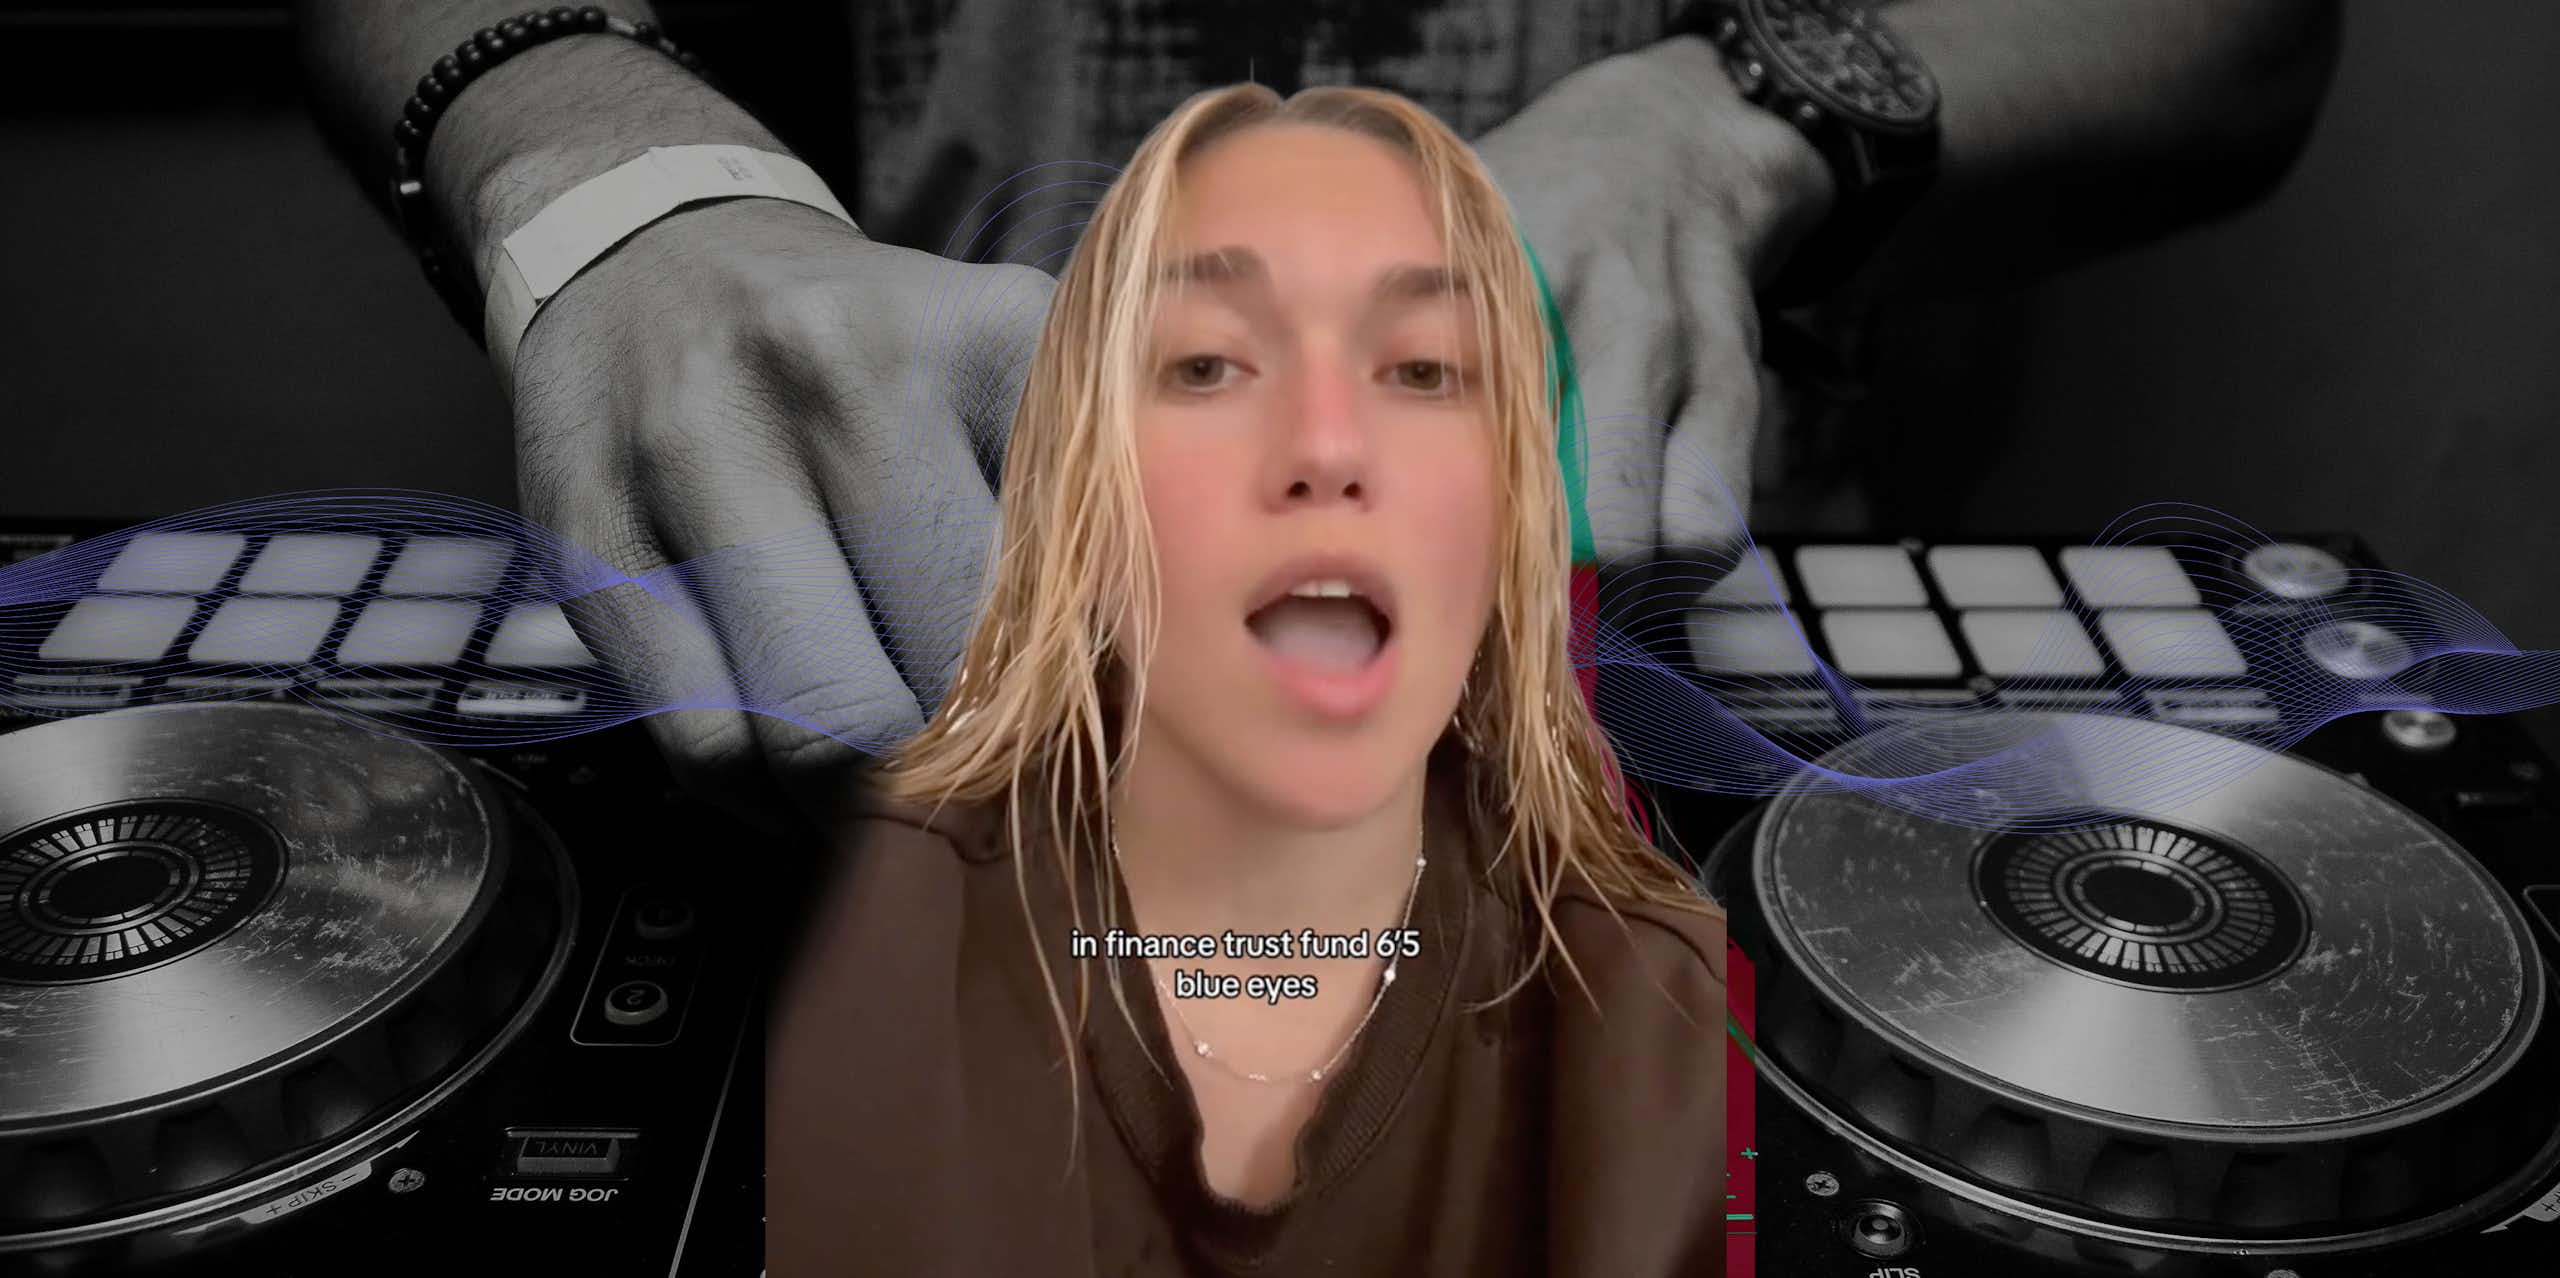 Composite image of girl_on_couch from TikTok and a DJ deck in the background